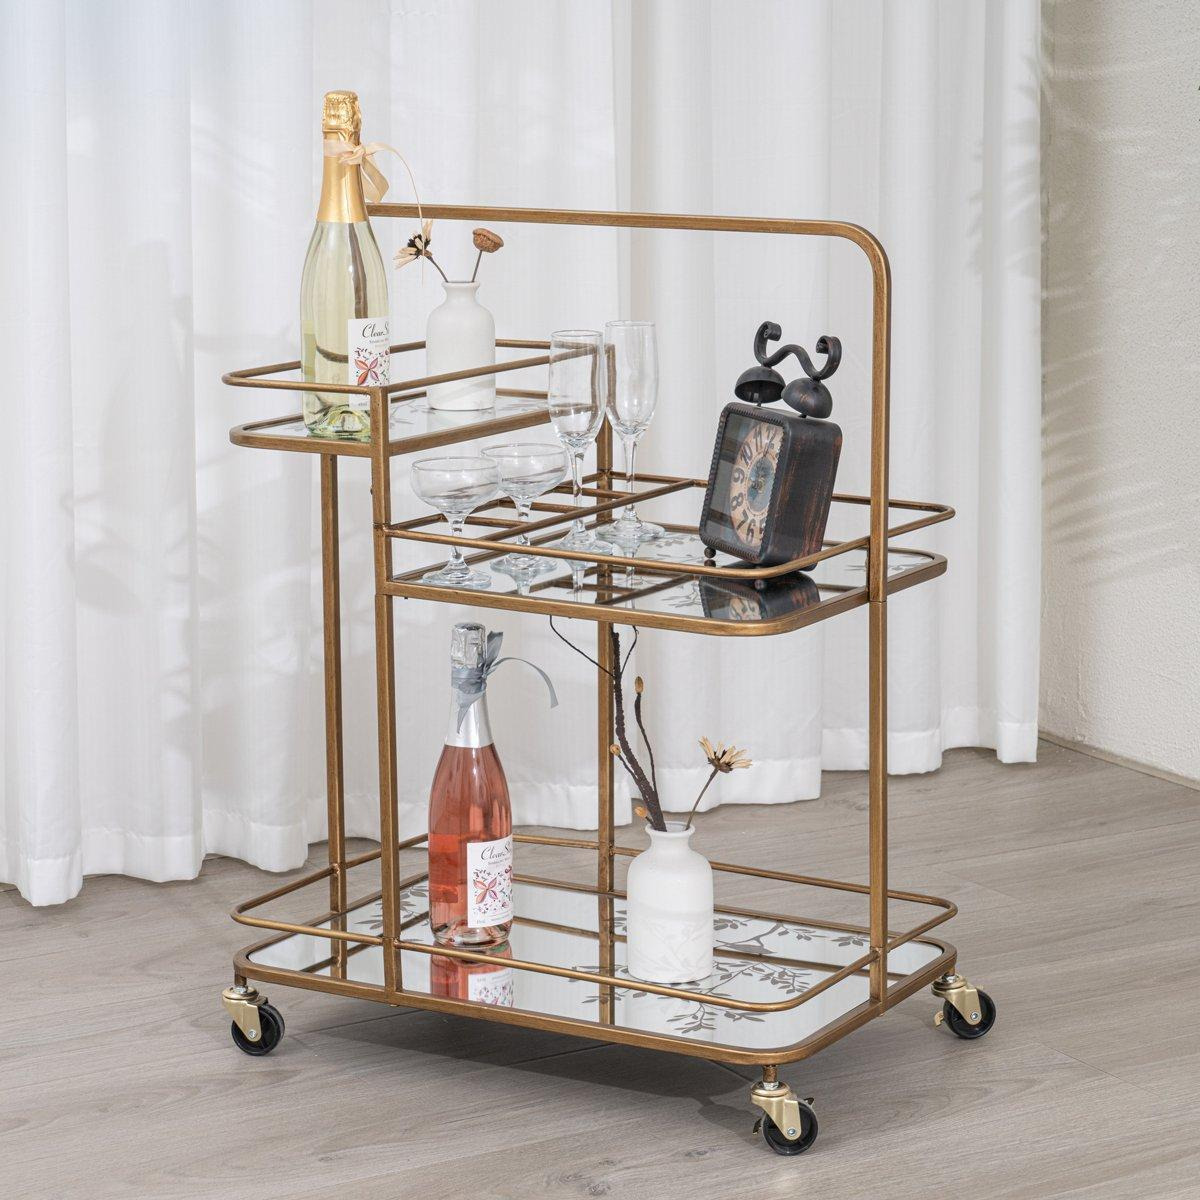 Gold Vintage Printed Glass 3 Tier Drinks Trolley With Wheels - image 1